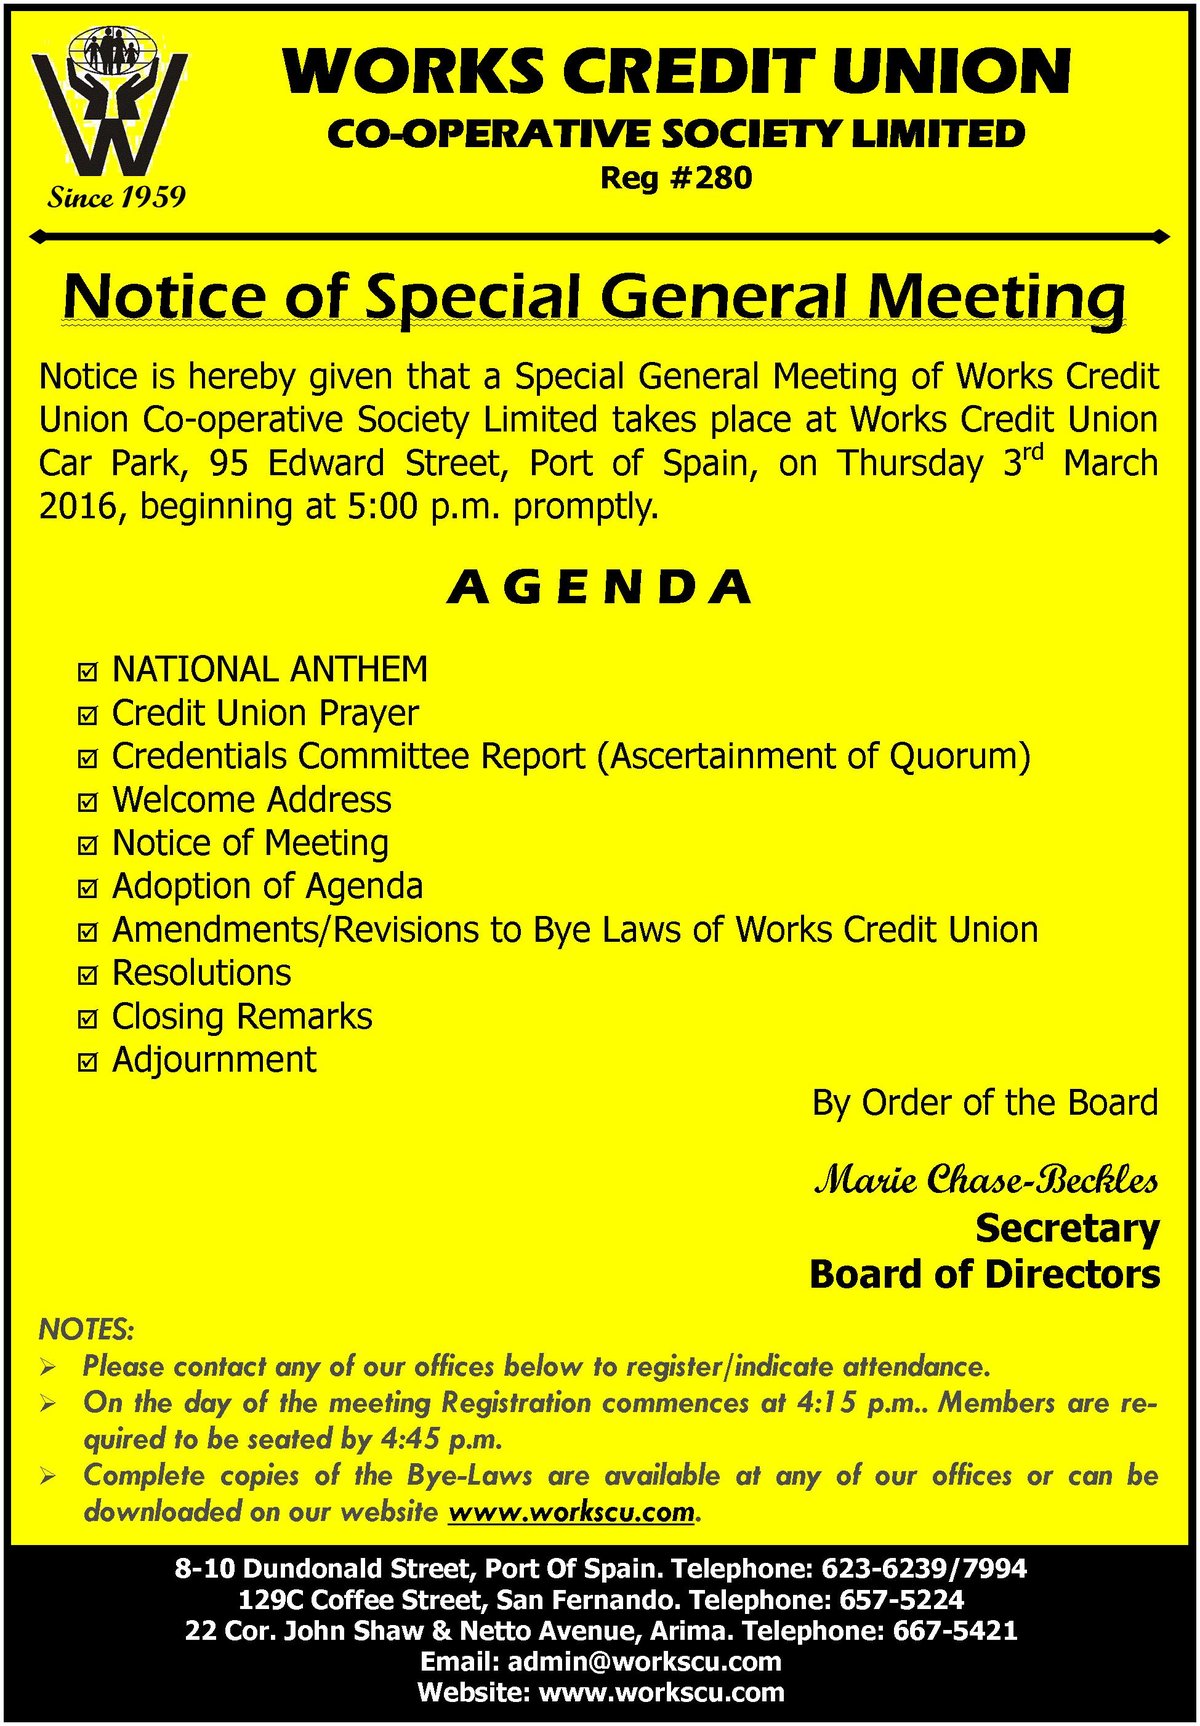 Notice of Special General Meeting Works Credit Union